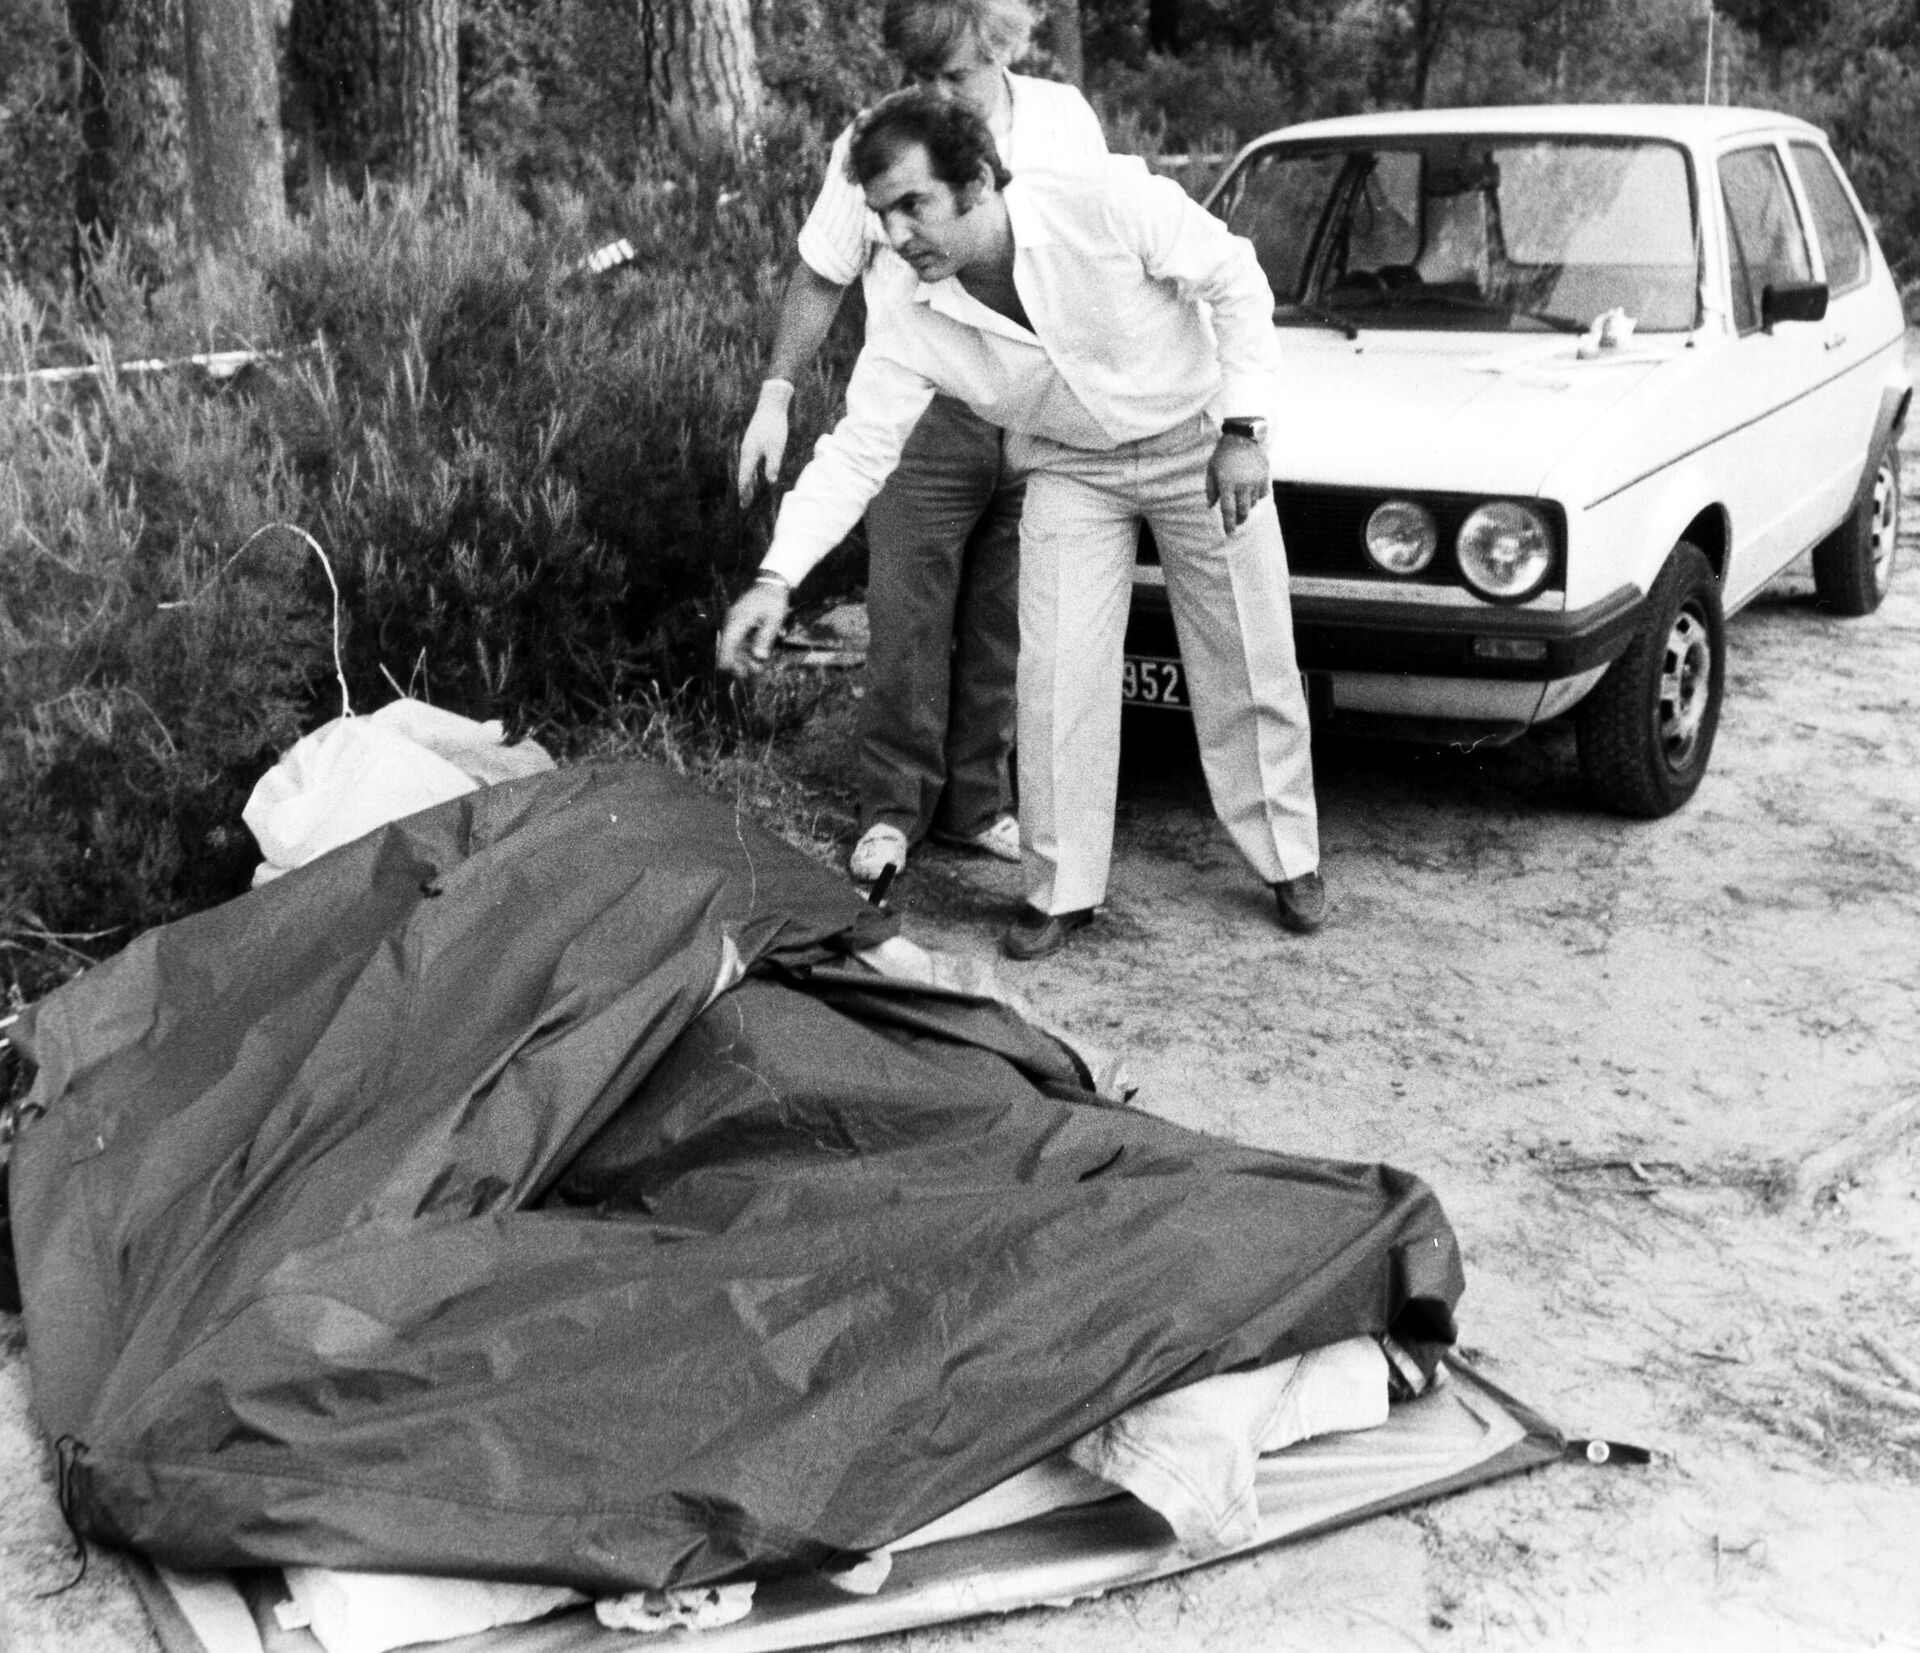 **FILE**A man covers with a tent the lifeless body Nadine Mauriot, of France, killed along with her boyfriend Jean Michel Kravcicvili in San Casciano Val di Pesa, Italy, in this Sept. 9, 1985 file photo. A best-selling U.S. author of thrillers researching serial killings of lovers in Tuscany has himself become entangled in the Italian probe of the decades-old crime spree, suspected by authorities of lying about his literary detective work. Douglas Preston had come to Florence last month to co-author, with an Italian journalist, a book about the so-called monster of Florence'' murders and mutilation of eight couples who were parked in their cars or camped in the Tuscan countryside between 1968 and 1985.  - Sputnik International, 1920, 26.03.2022